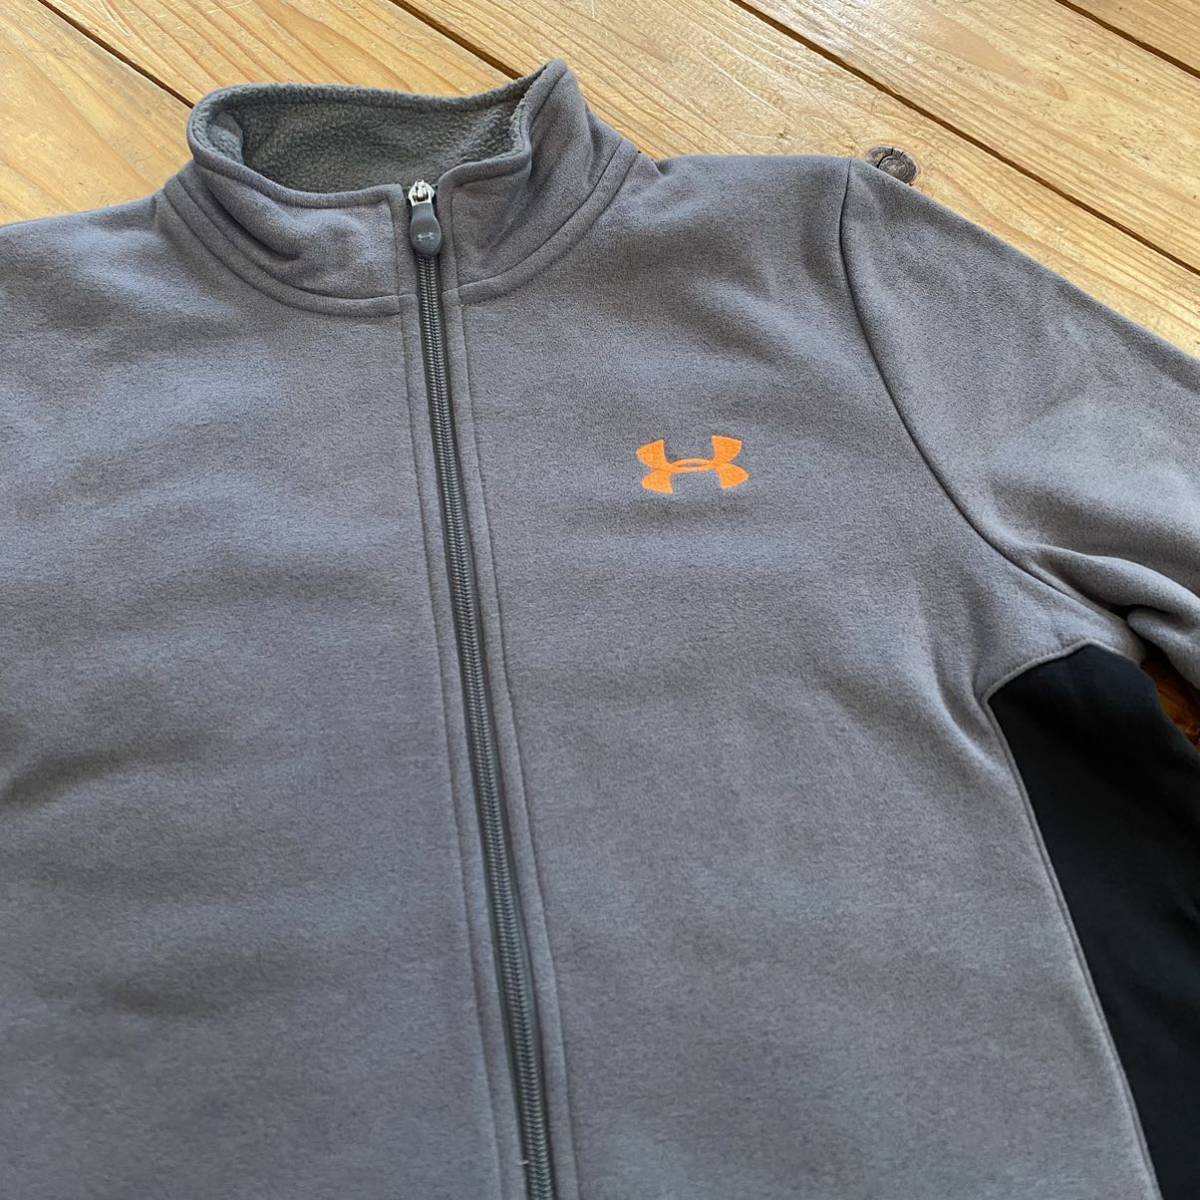  new goods UNDER ARMOUR Under Armor fleece jacket boys XL size gray cold gear sport outdoor America buying up J2738